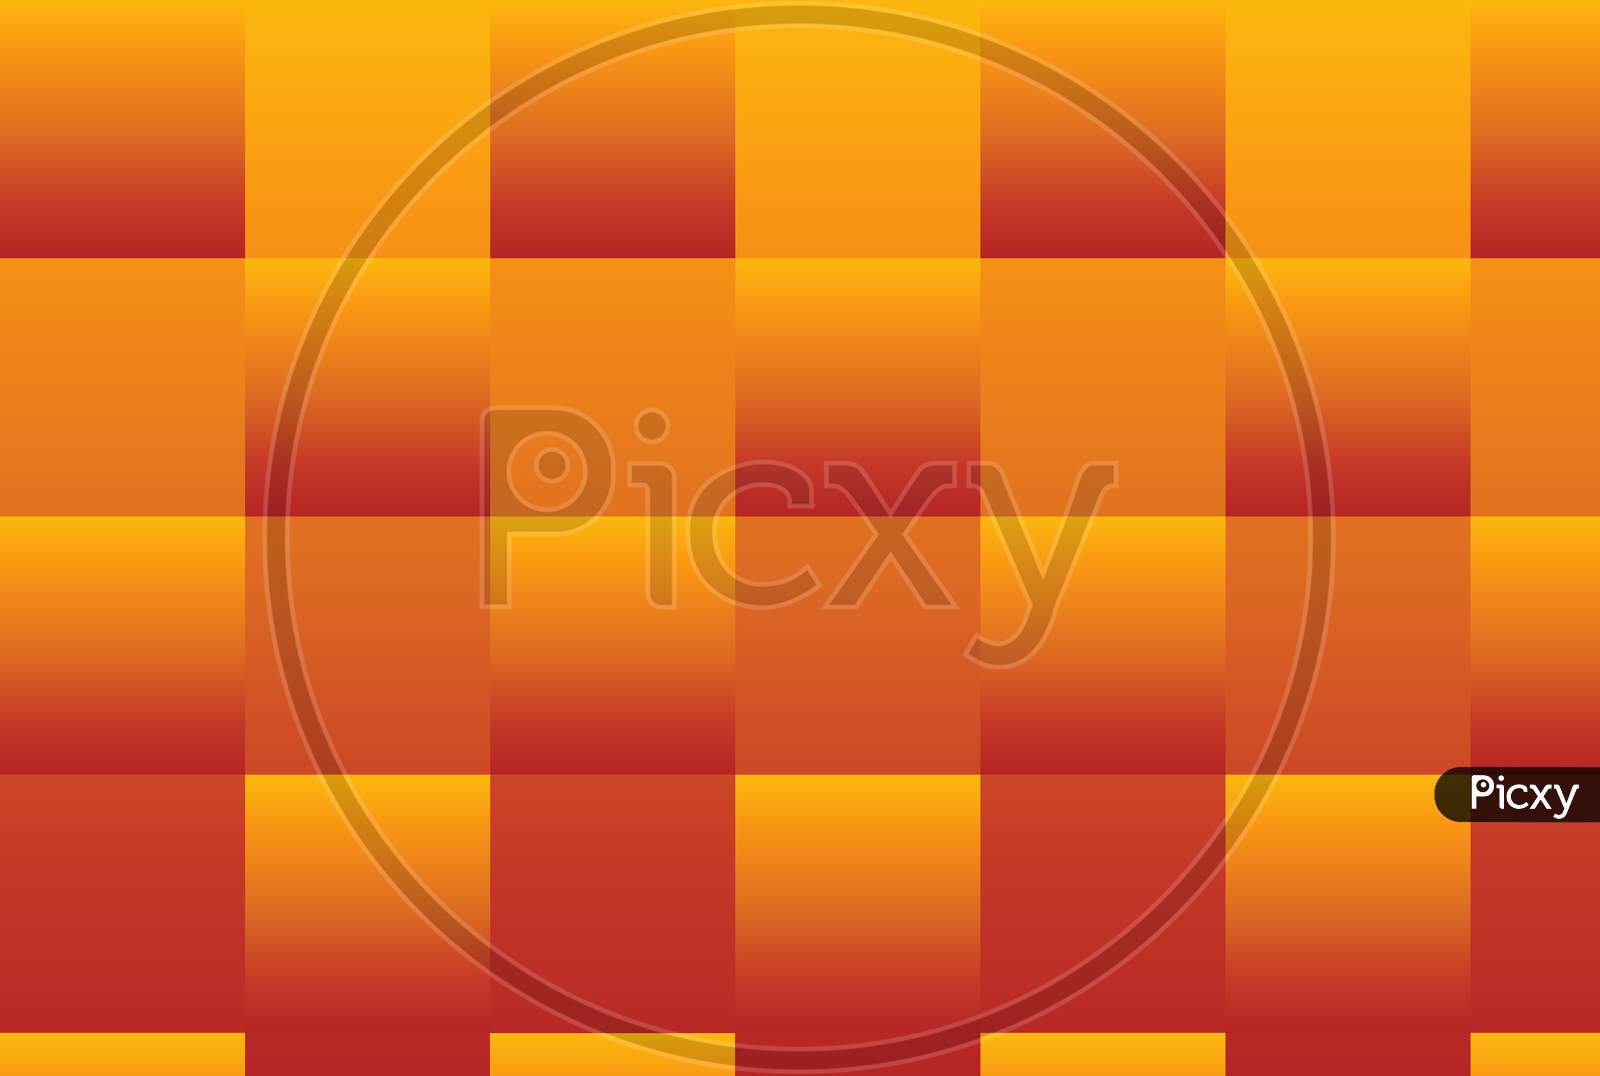 square pattern with gradient like sunset. checked pattern with sunset style gradient pattern.